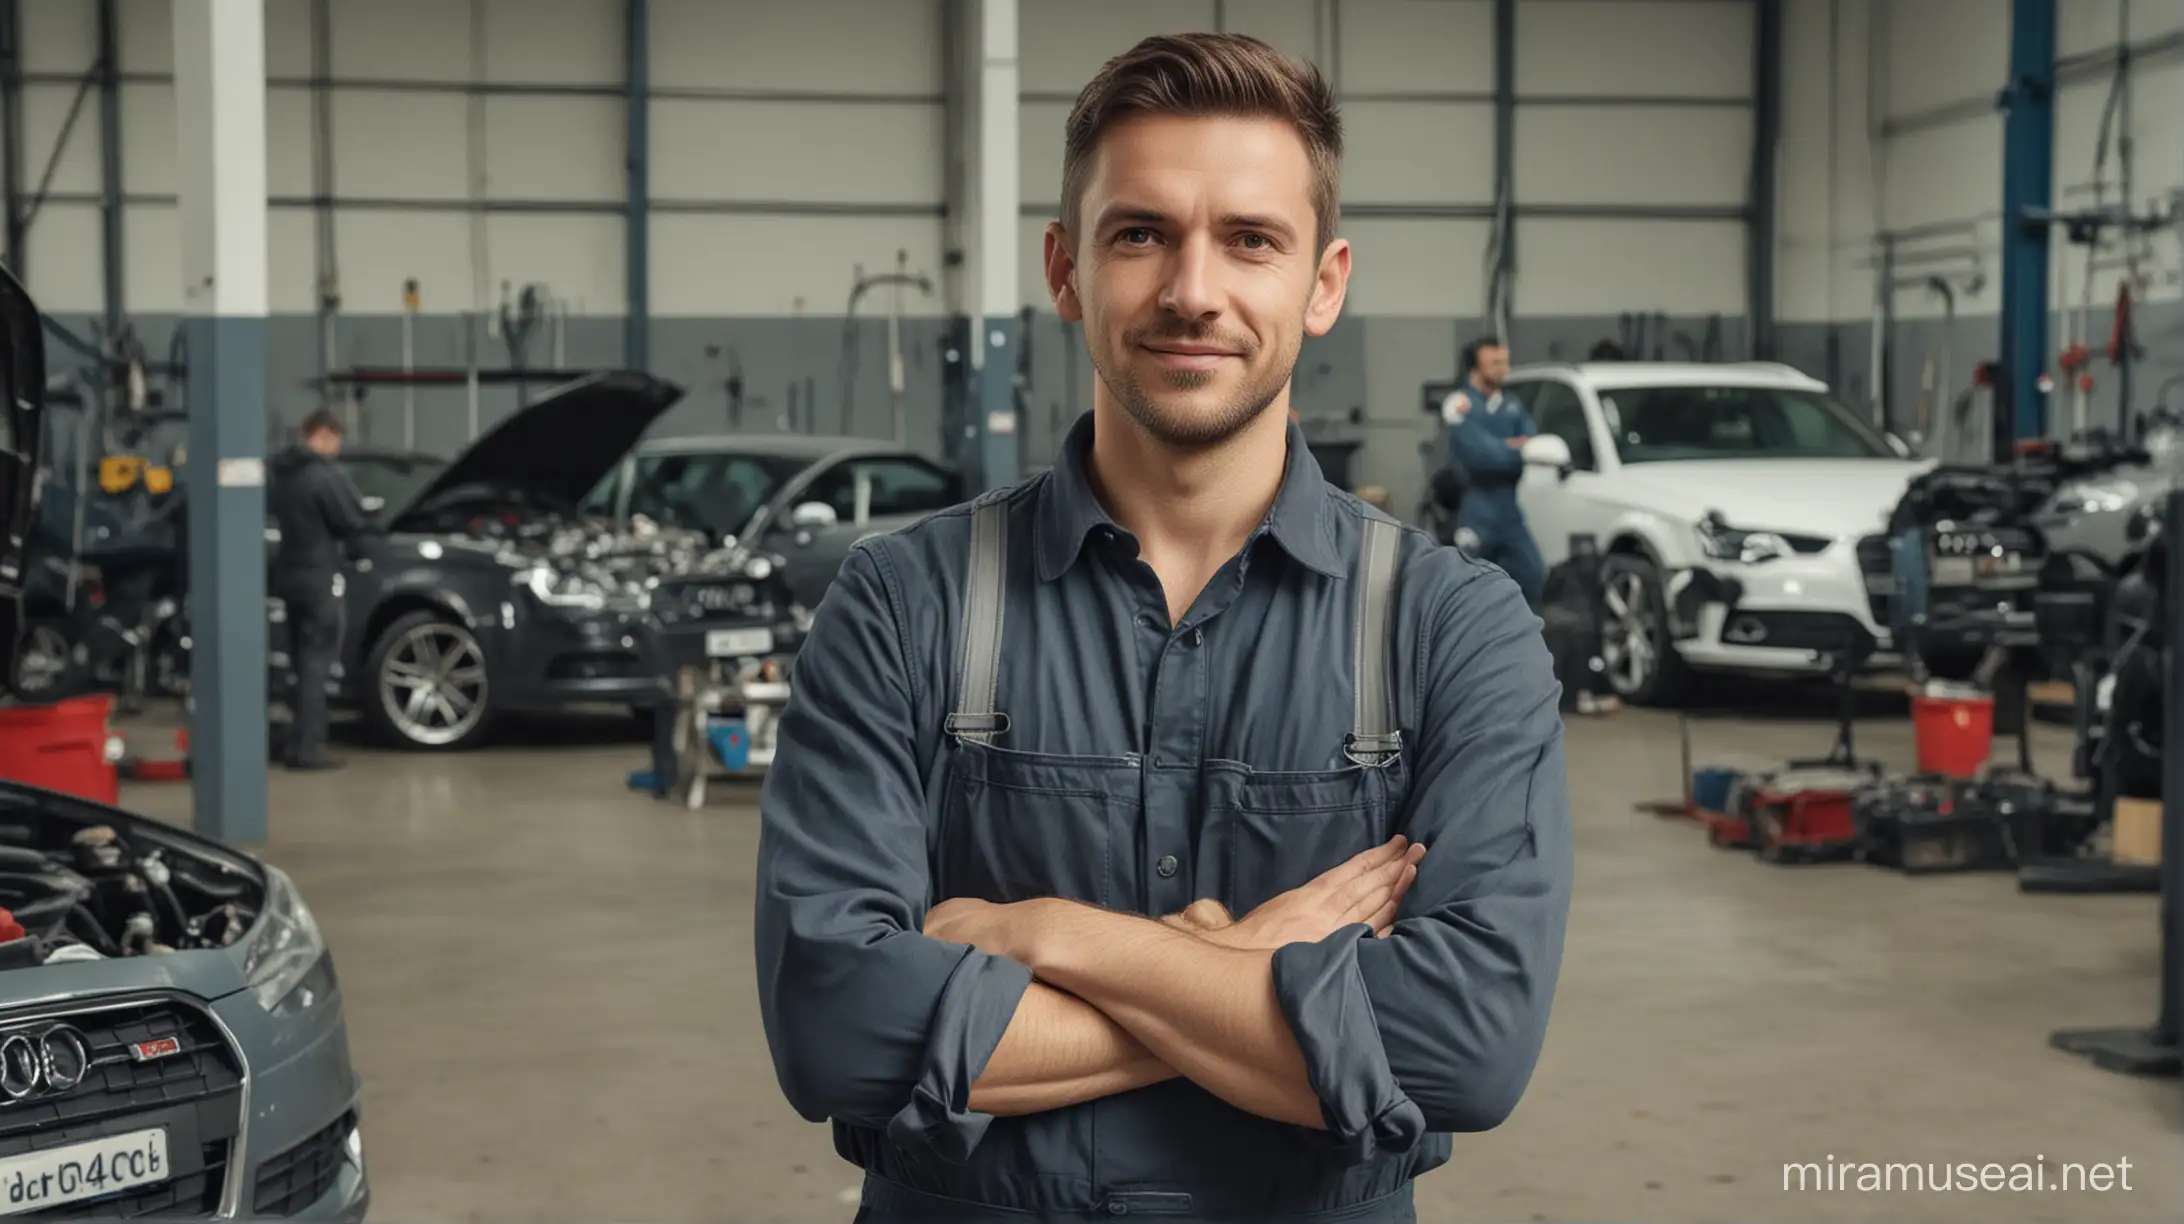 a mechanic in a car workshop, satisfied with the work he has done, stands in front of an Audi, arms crossed, tool or rag in hand, looking into the camera.